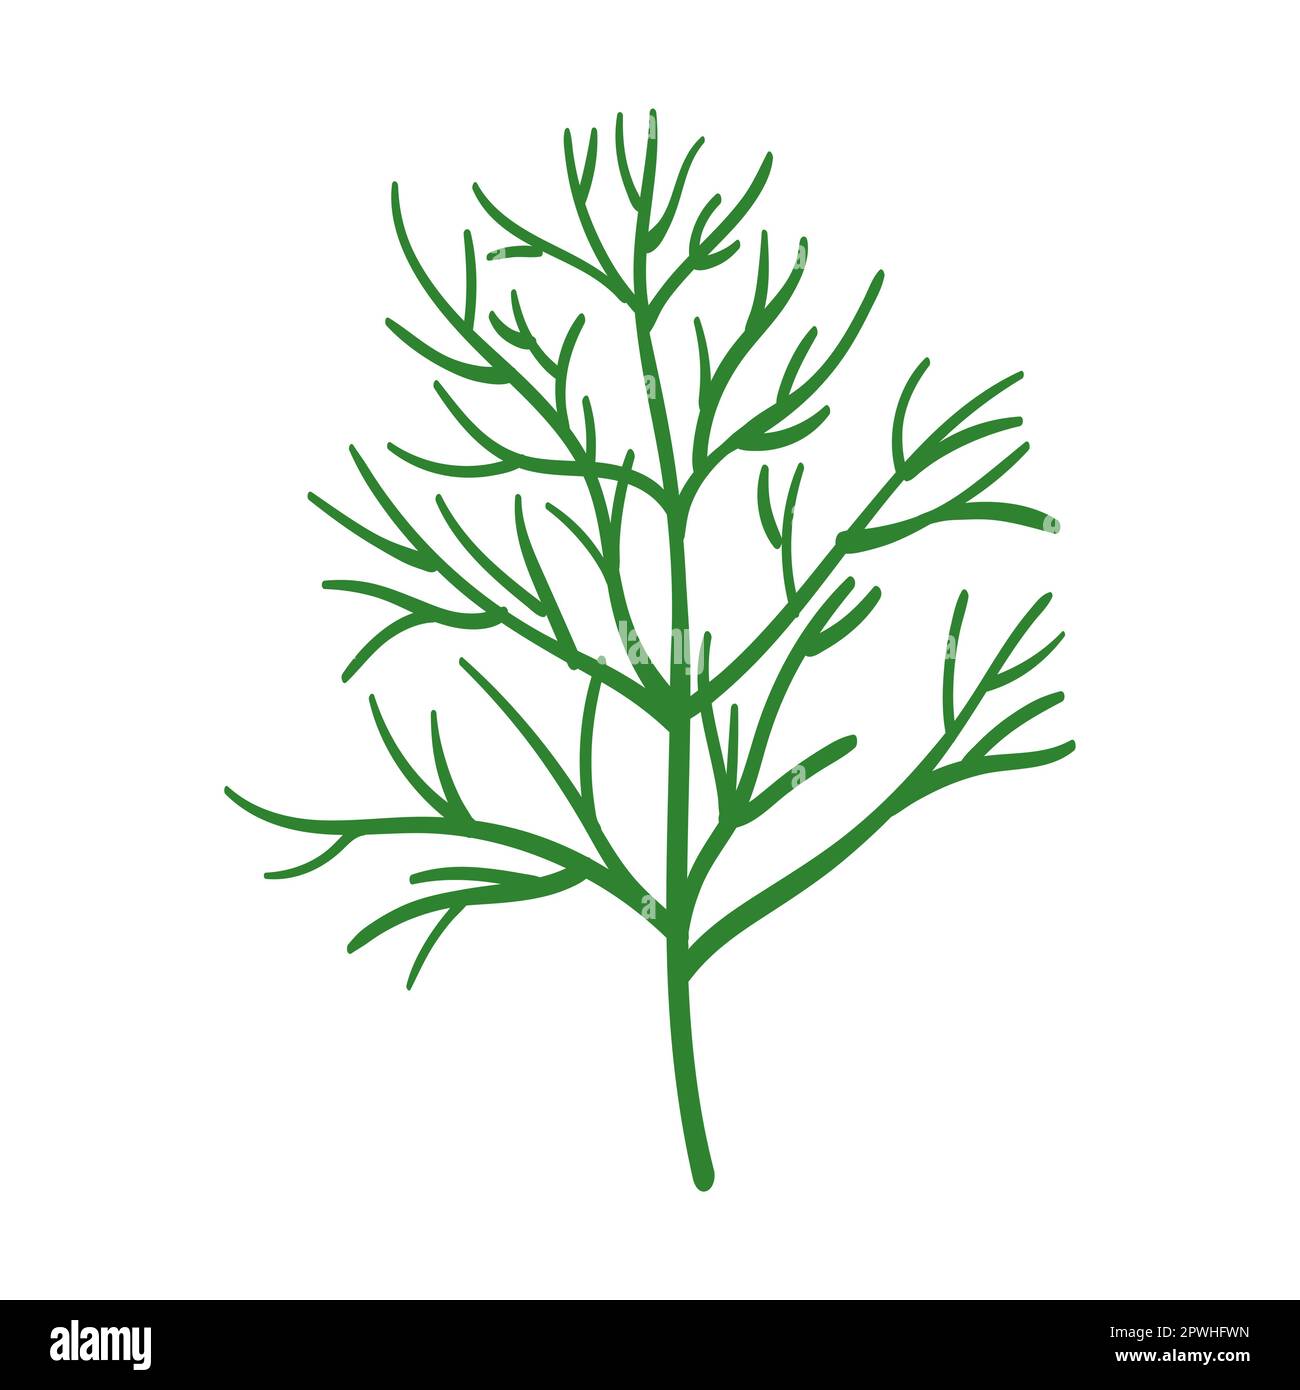 Dill herb and leaves vector illustration. Spicy herbal plants, parsley, rosemary, coriander, oregano, mint on white background Stock Vector